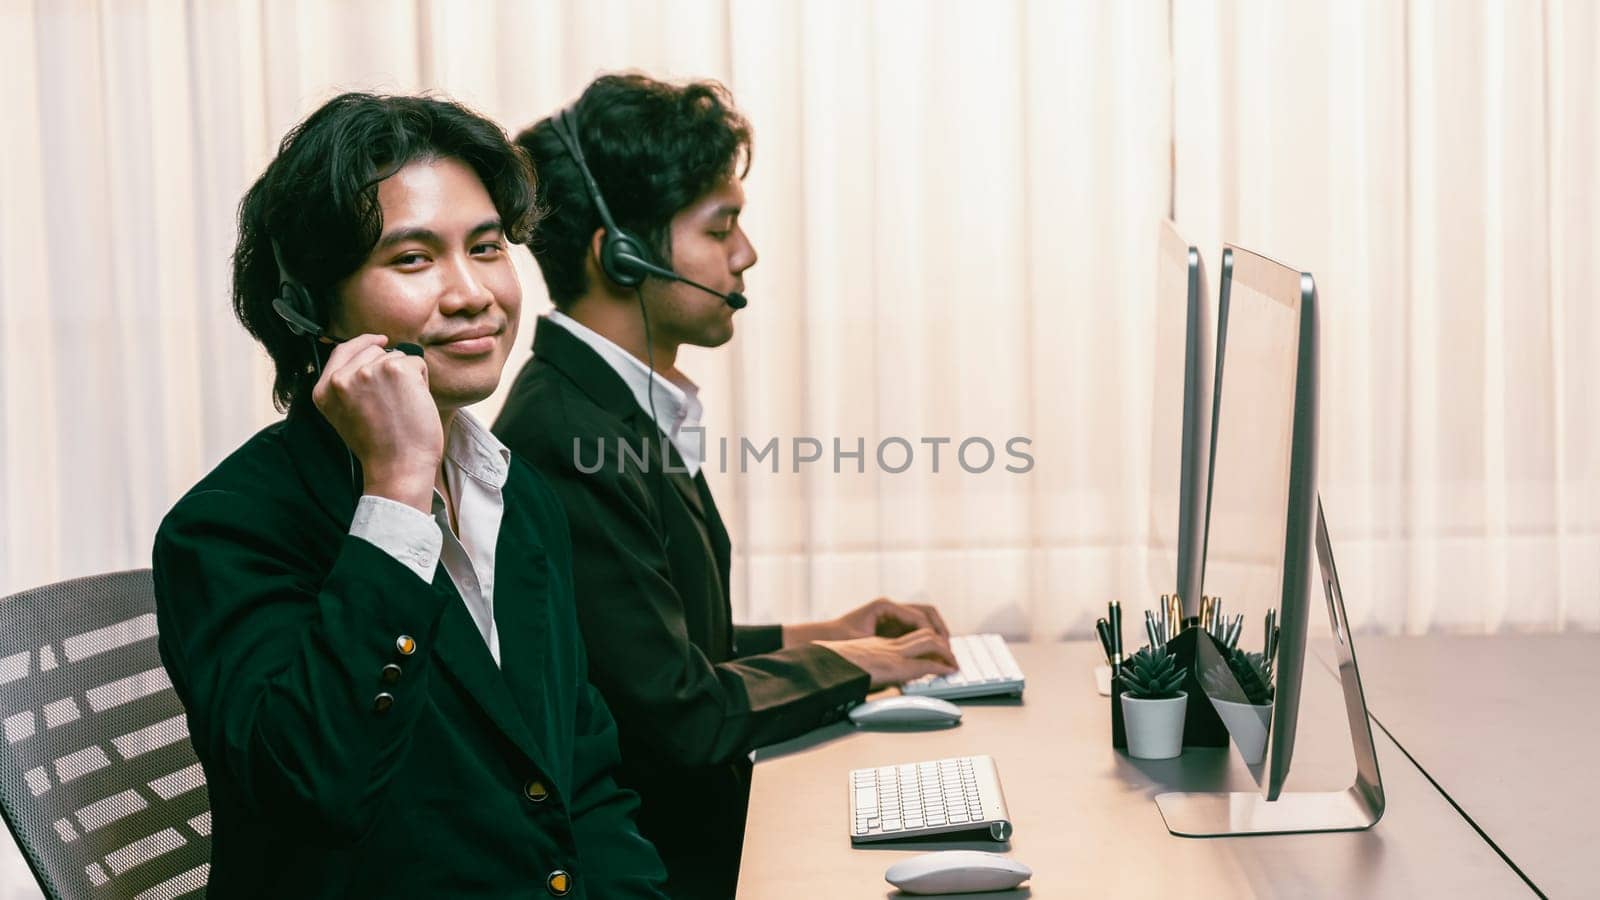 Panorama call center operator team or telesales representative siting at office desk wearing headset and engaged in conversation with client providing customer service support or making sales. Prodigy